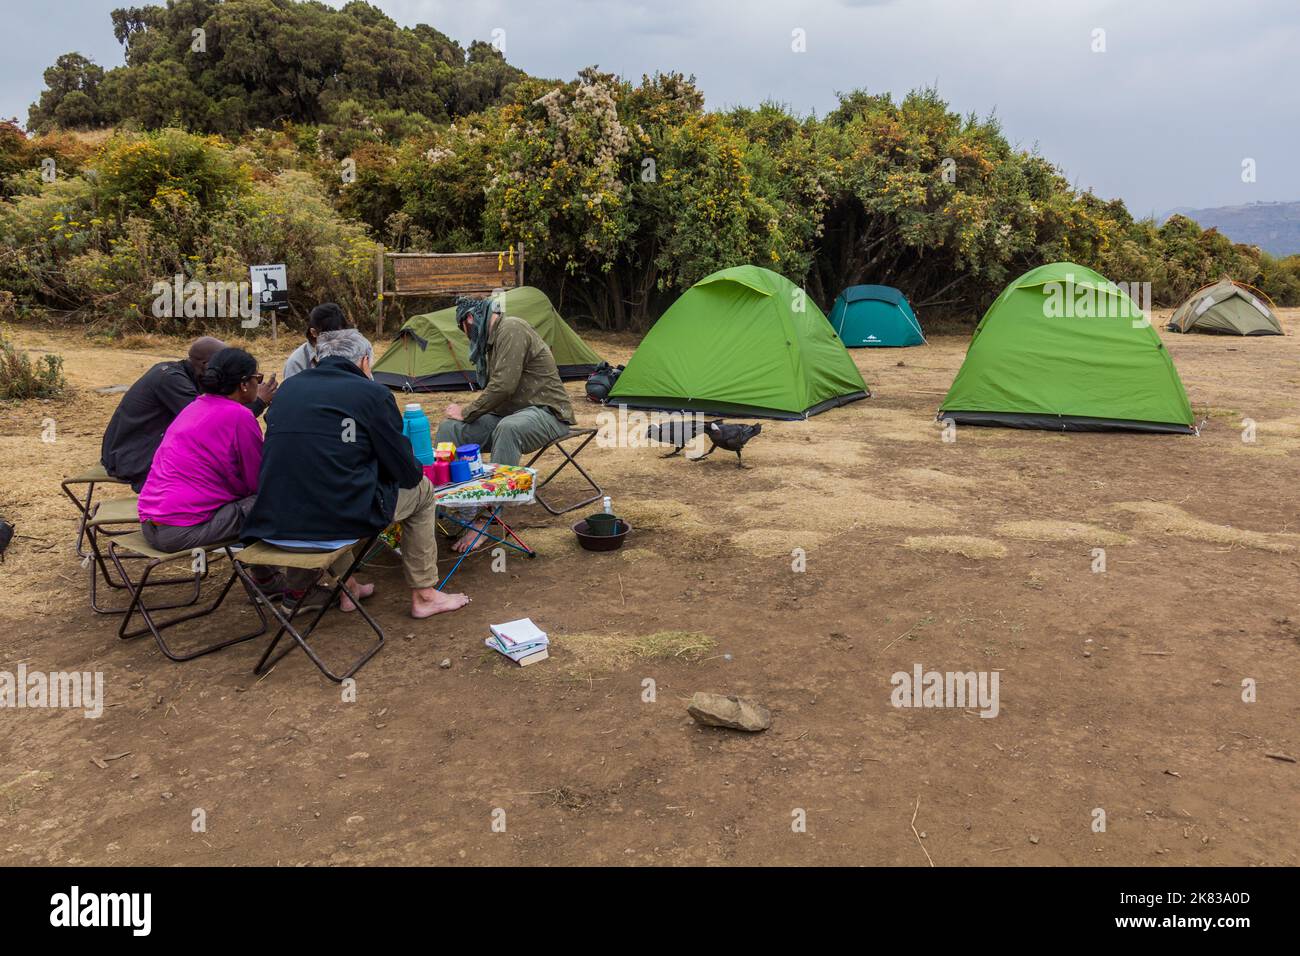 SIMIEN MOUNTAINS, ETHIOPIA - MARCH 15, 2019: Tourists in Sankaber camping in Simien mountains, Ethiopia Stock Photo